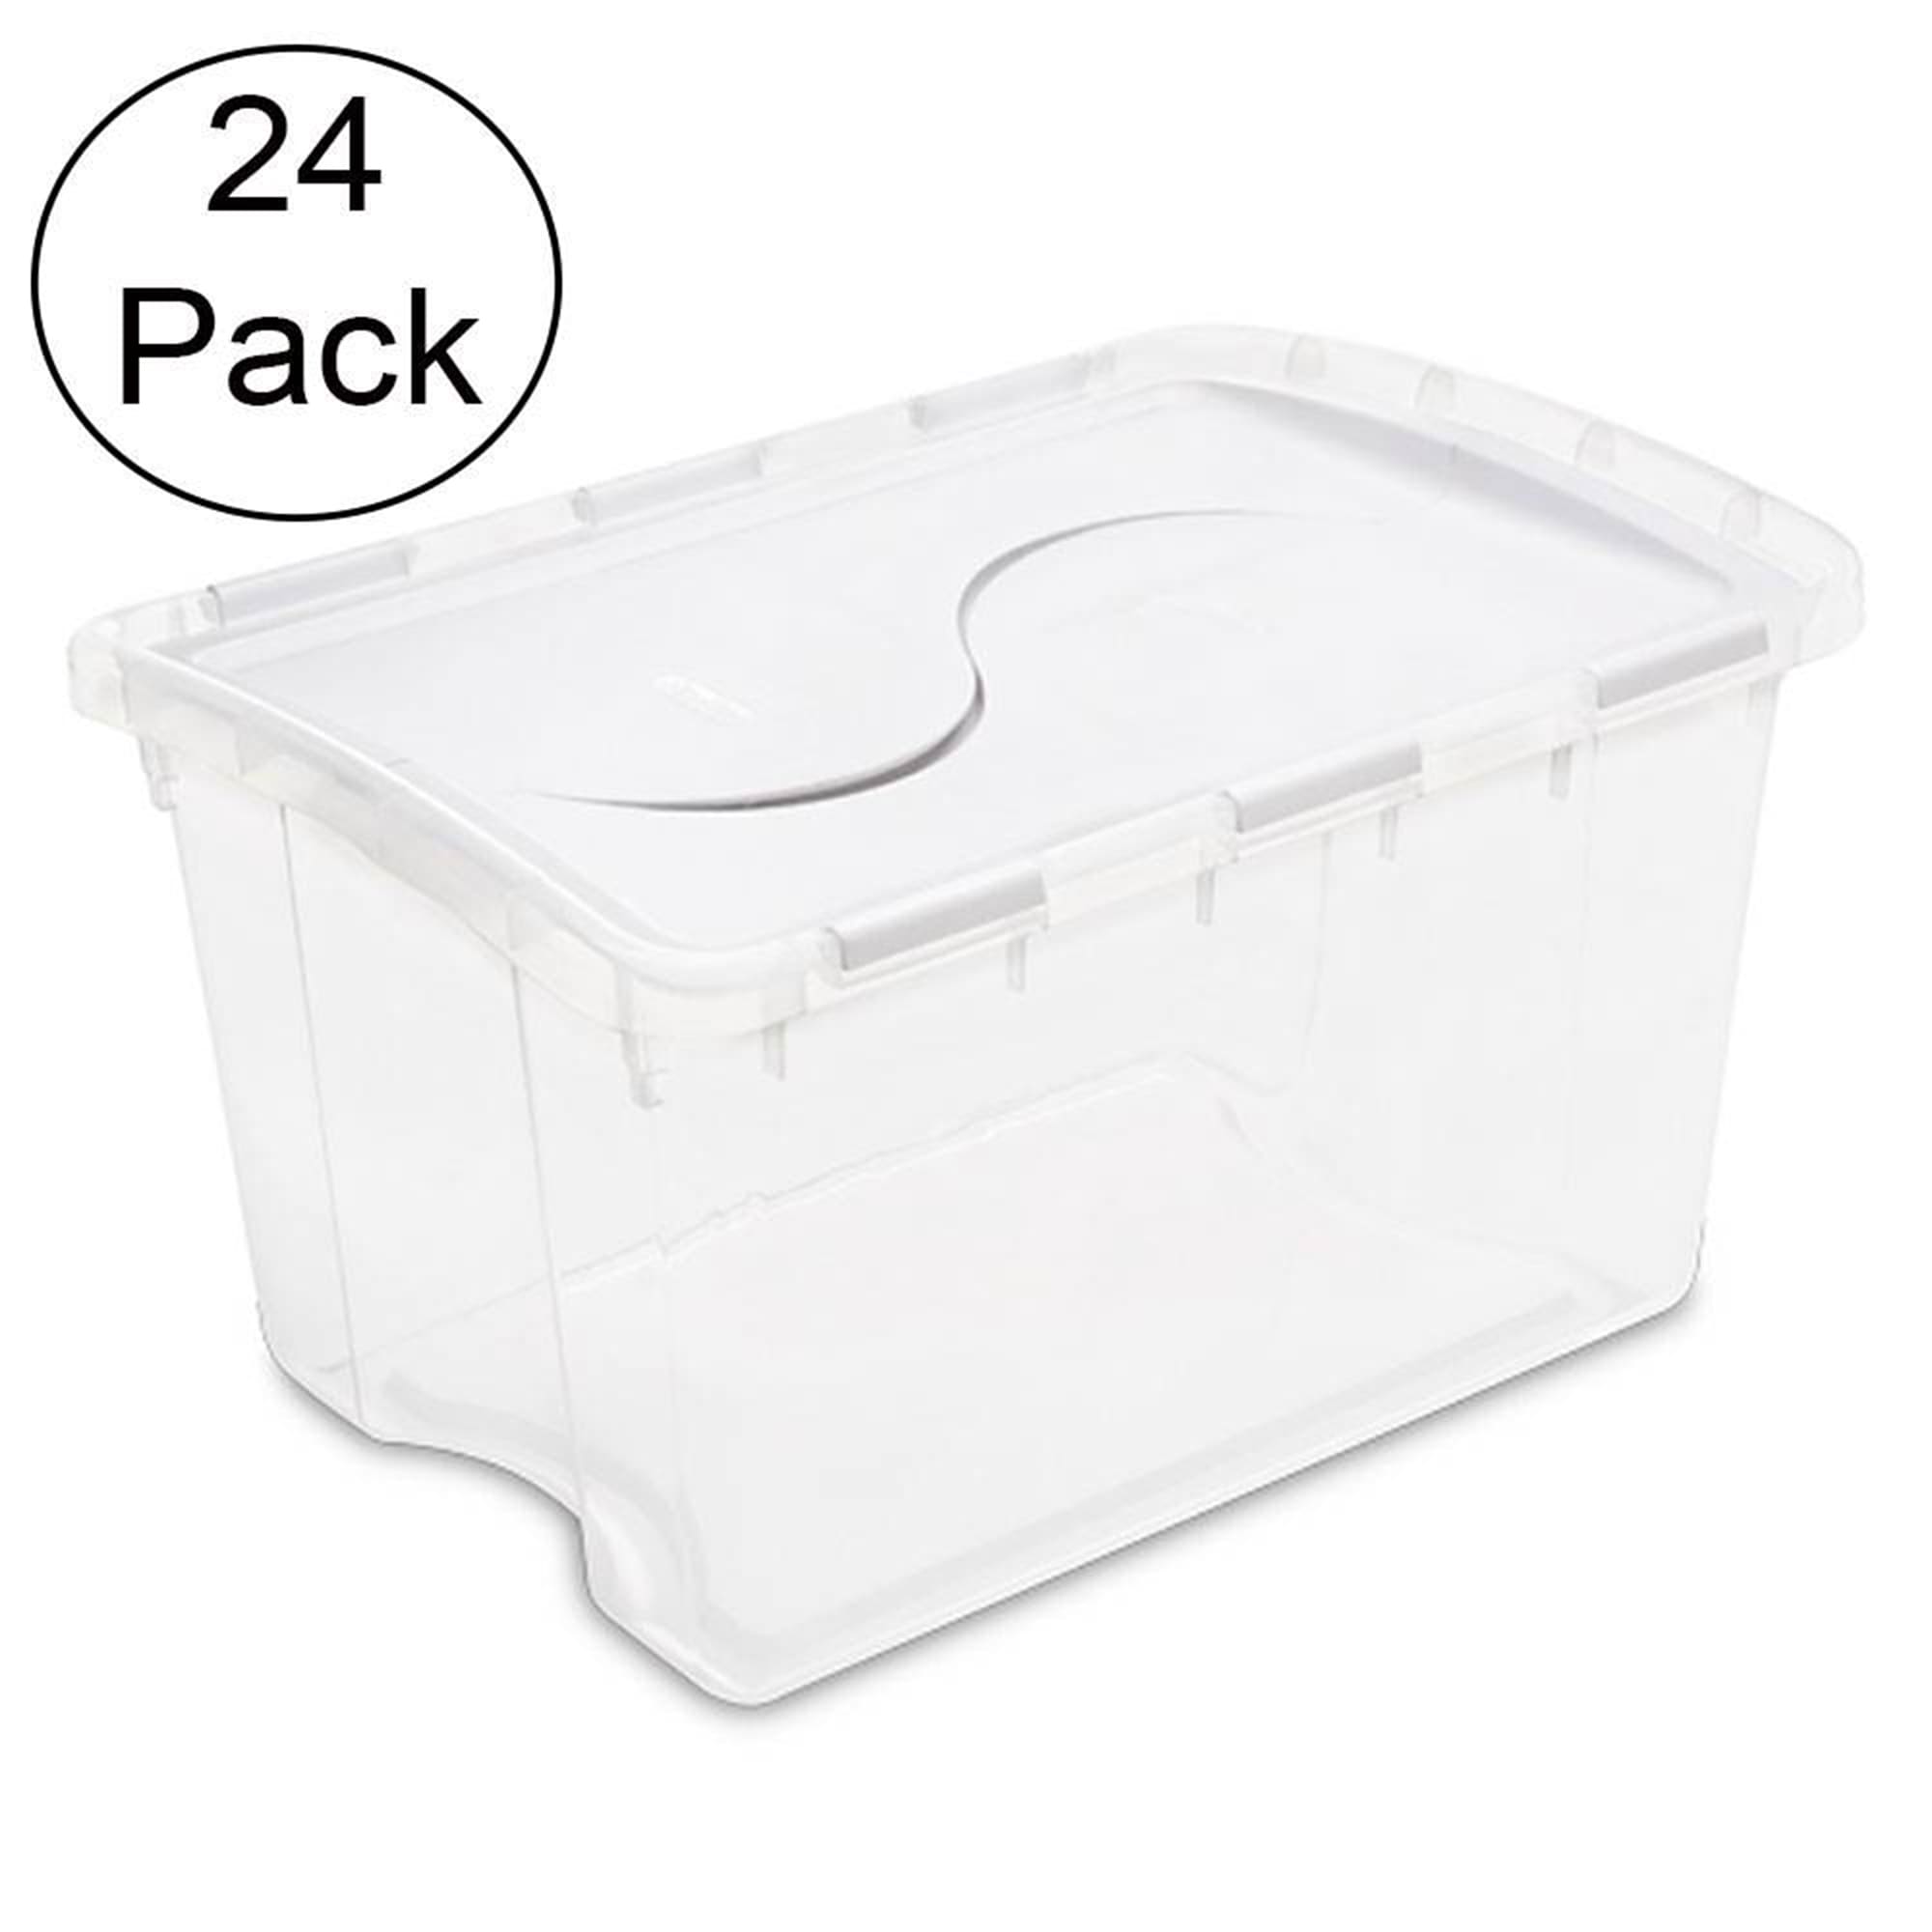 Homz Products Medium 12-Gallons (48-Quart) Red/Clear Heavy Duty Tote with  Standard Snap Lid at